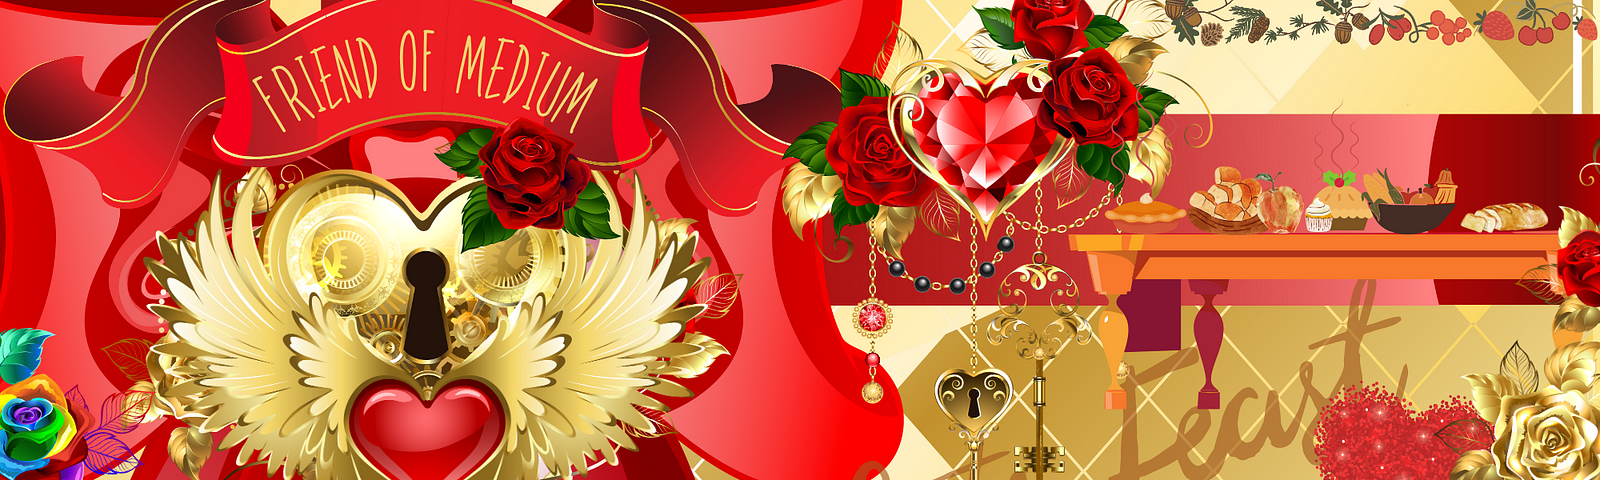 A festive scene of glowing red hearts, a golden keyhole, golden keys, a banquet table with delicious pies. Gold and red roses. A red banner, saying Friend of Medium.